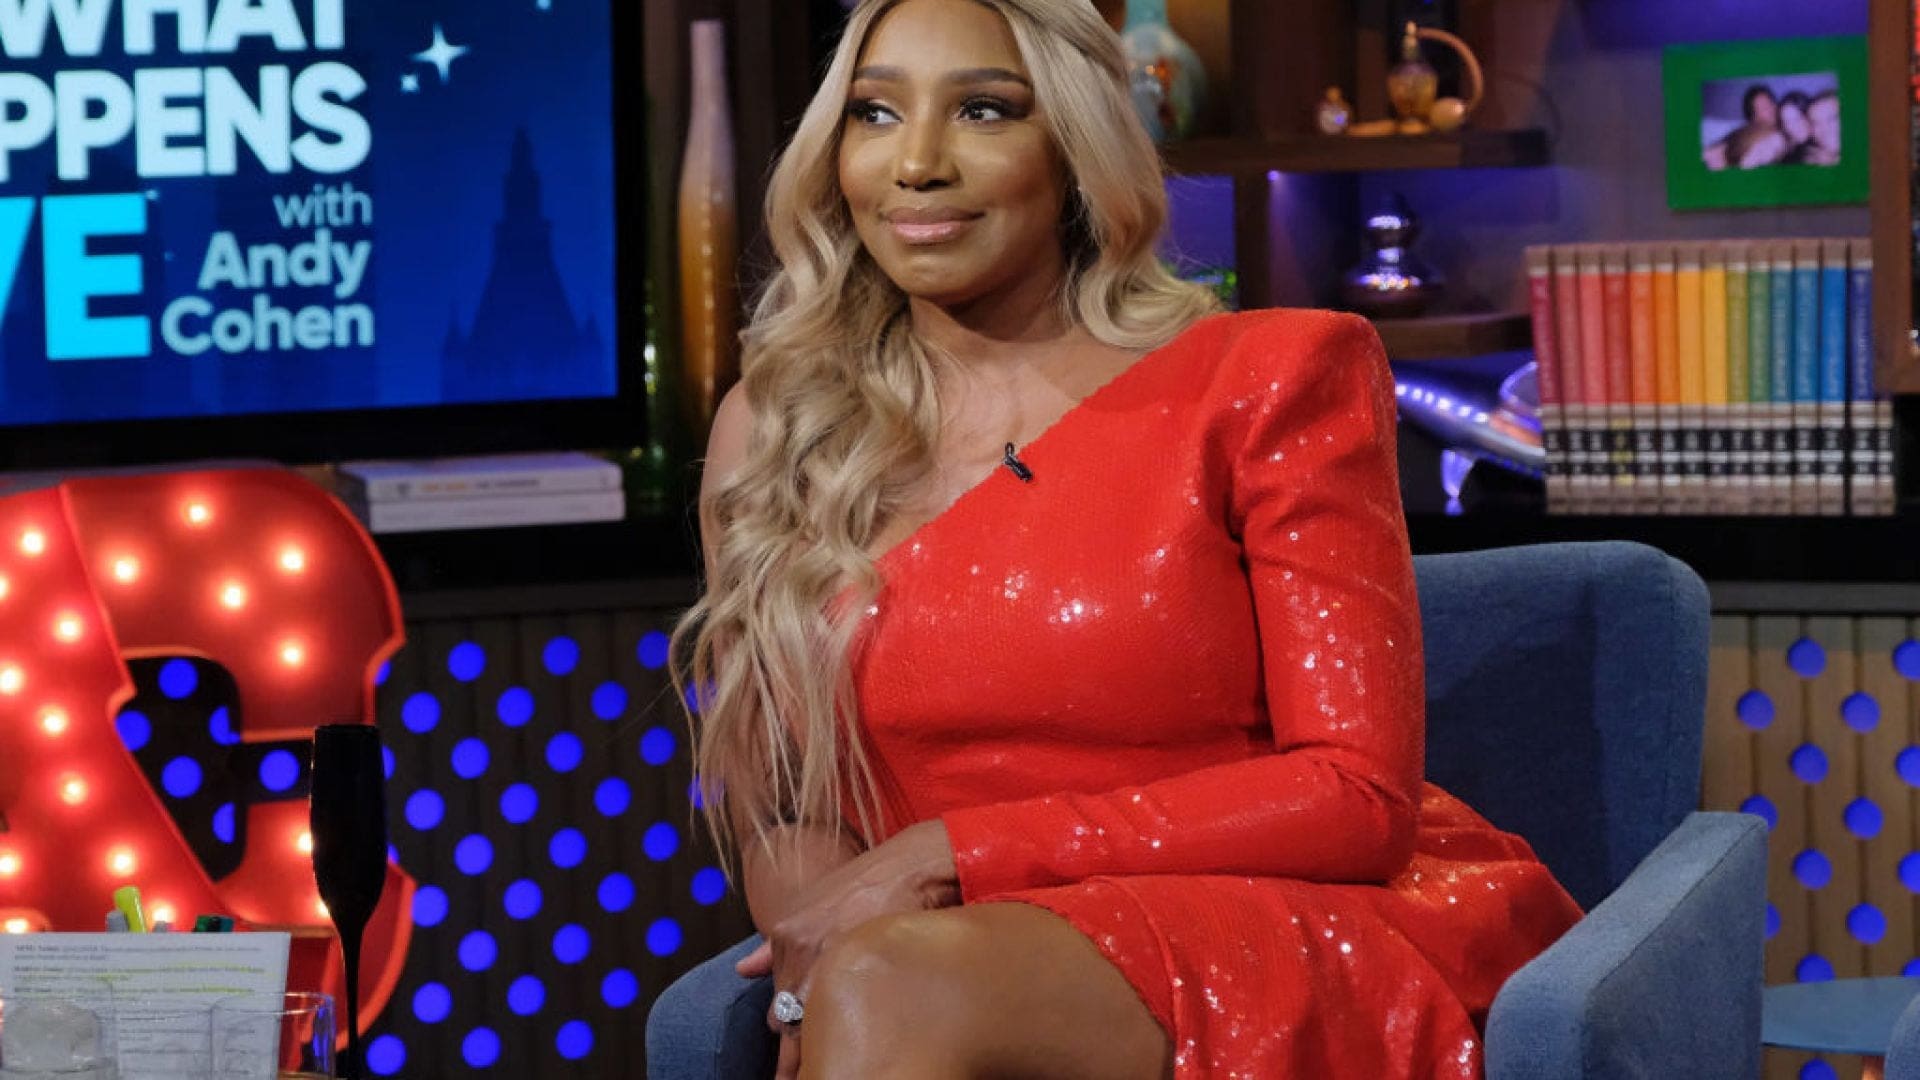 NeNe Leakes Offers Fans Her Gratitude For All Their Support